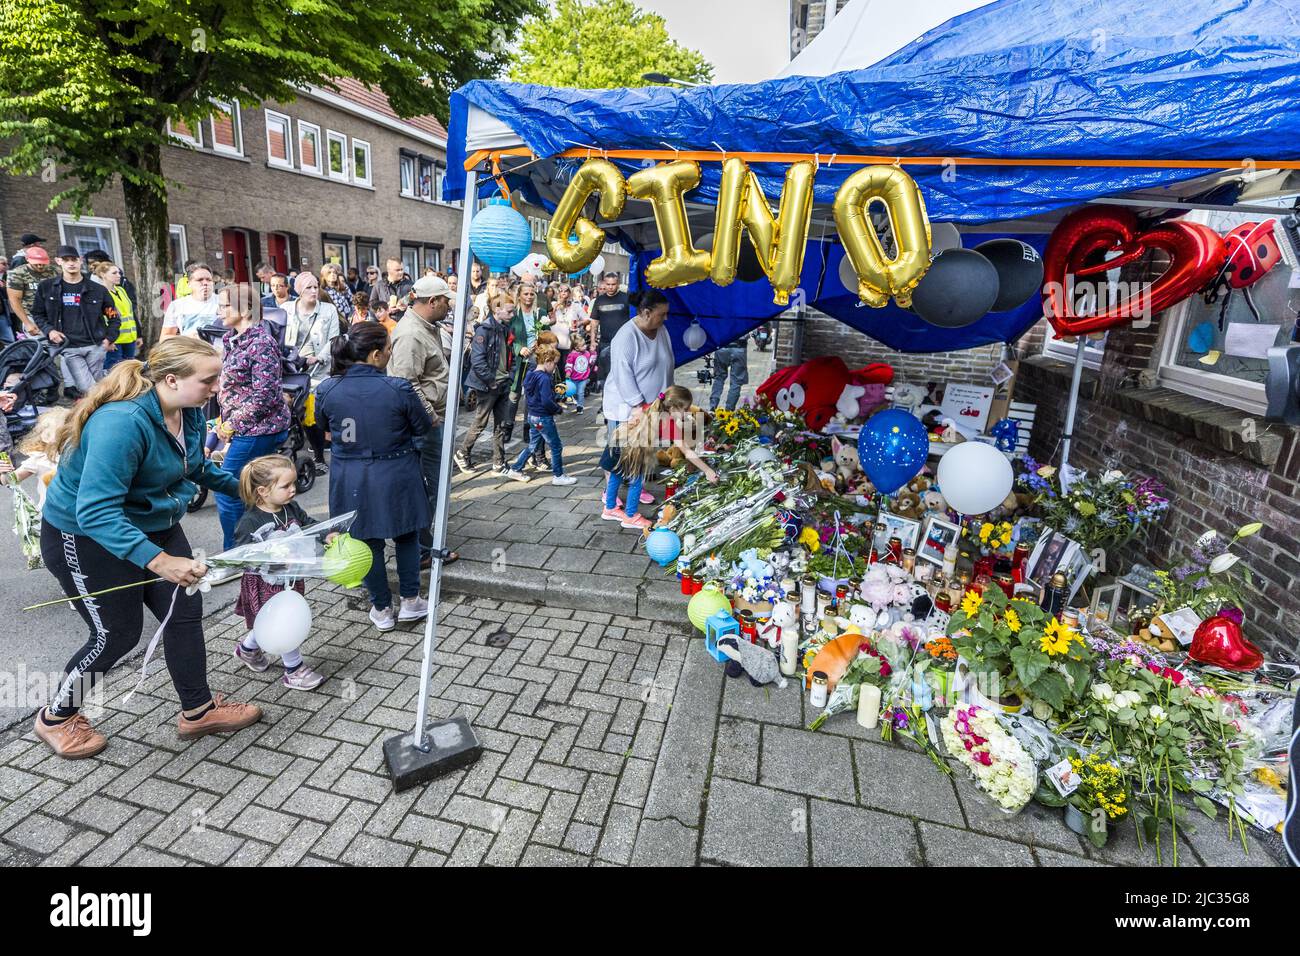 2022-06-09 19:09:08 MAASTRICHT - People put flowers, stuffed animals, photos and candles in front of the house in memory of 9-year-old Gino in the neighborhood where he lived. The boy disappeared from a playground on June 1, and his remains were found a few days later near a house. A 22-year-old suspect has been arrested. ANP MARCEL VAN HOORN netherlands out - belgium out Stock Photo